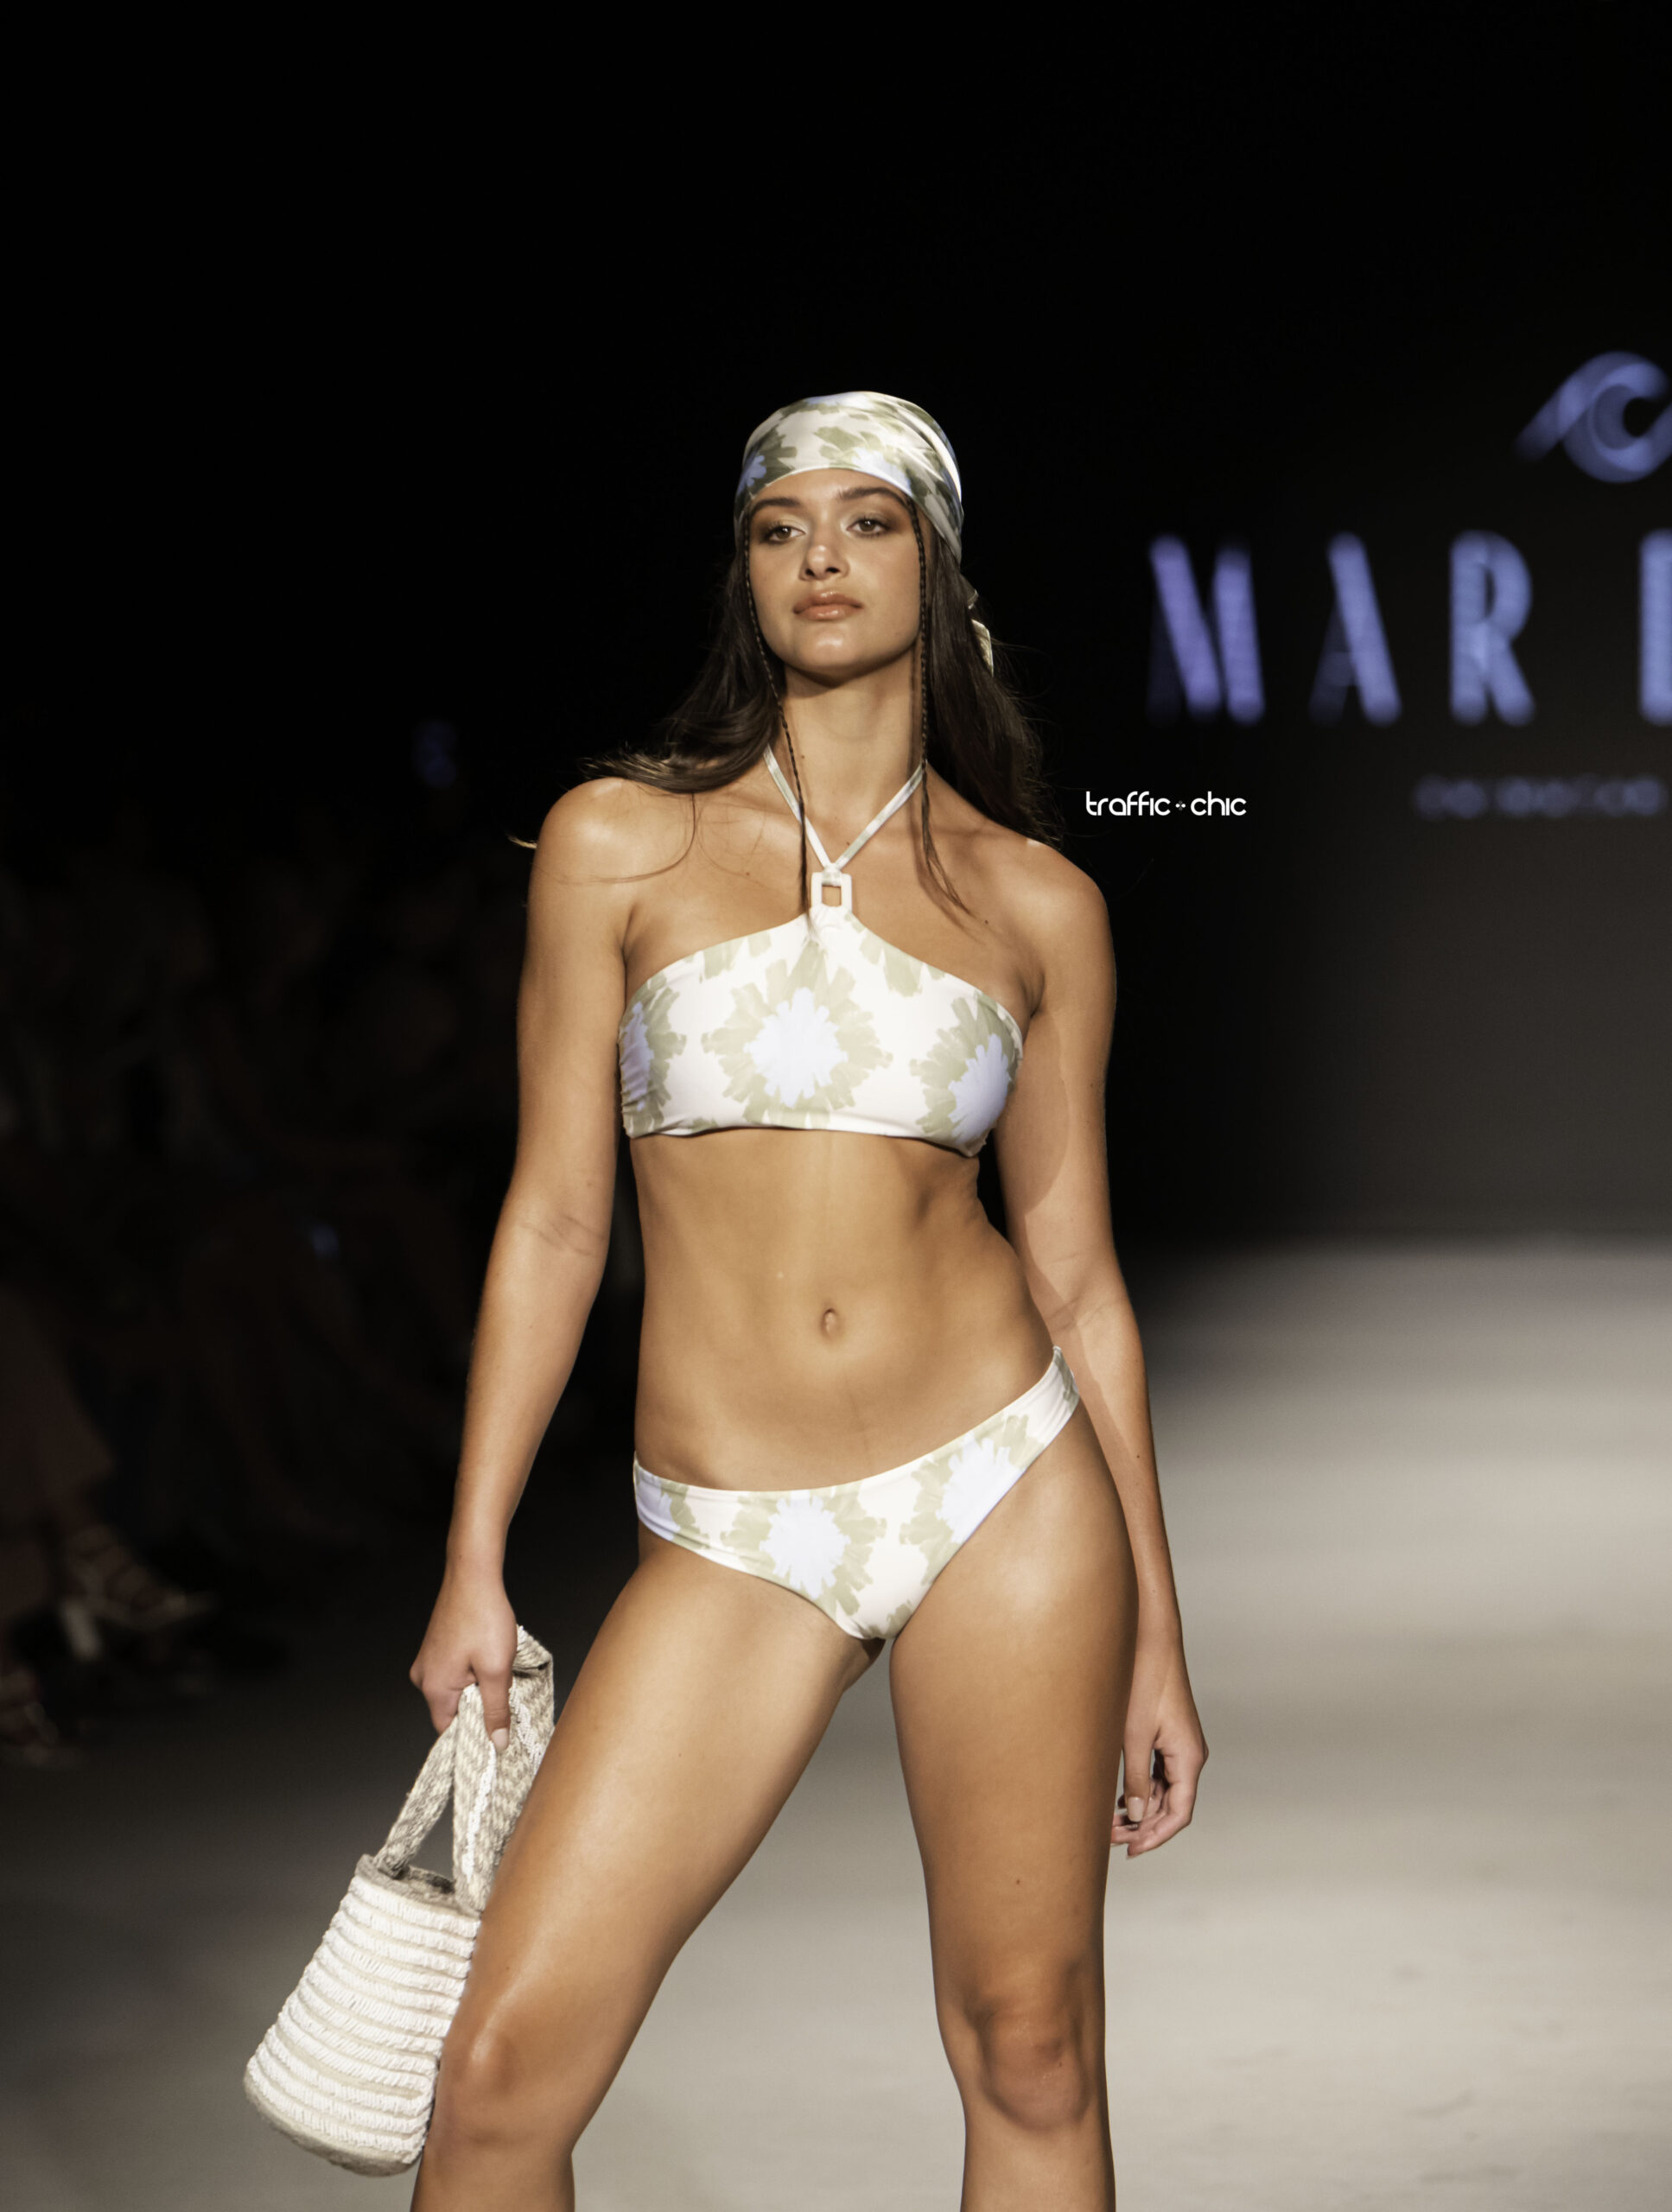 Mar de Lua at Destination Colombia runway show at Paraiso Miami Beach - Photo by Michael Ferrer for TRAFFIC CHIC